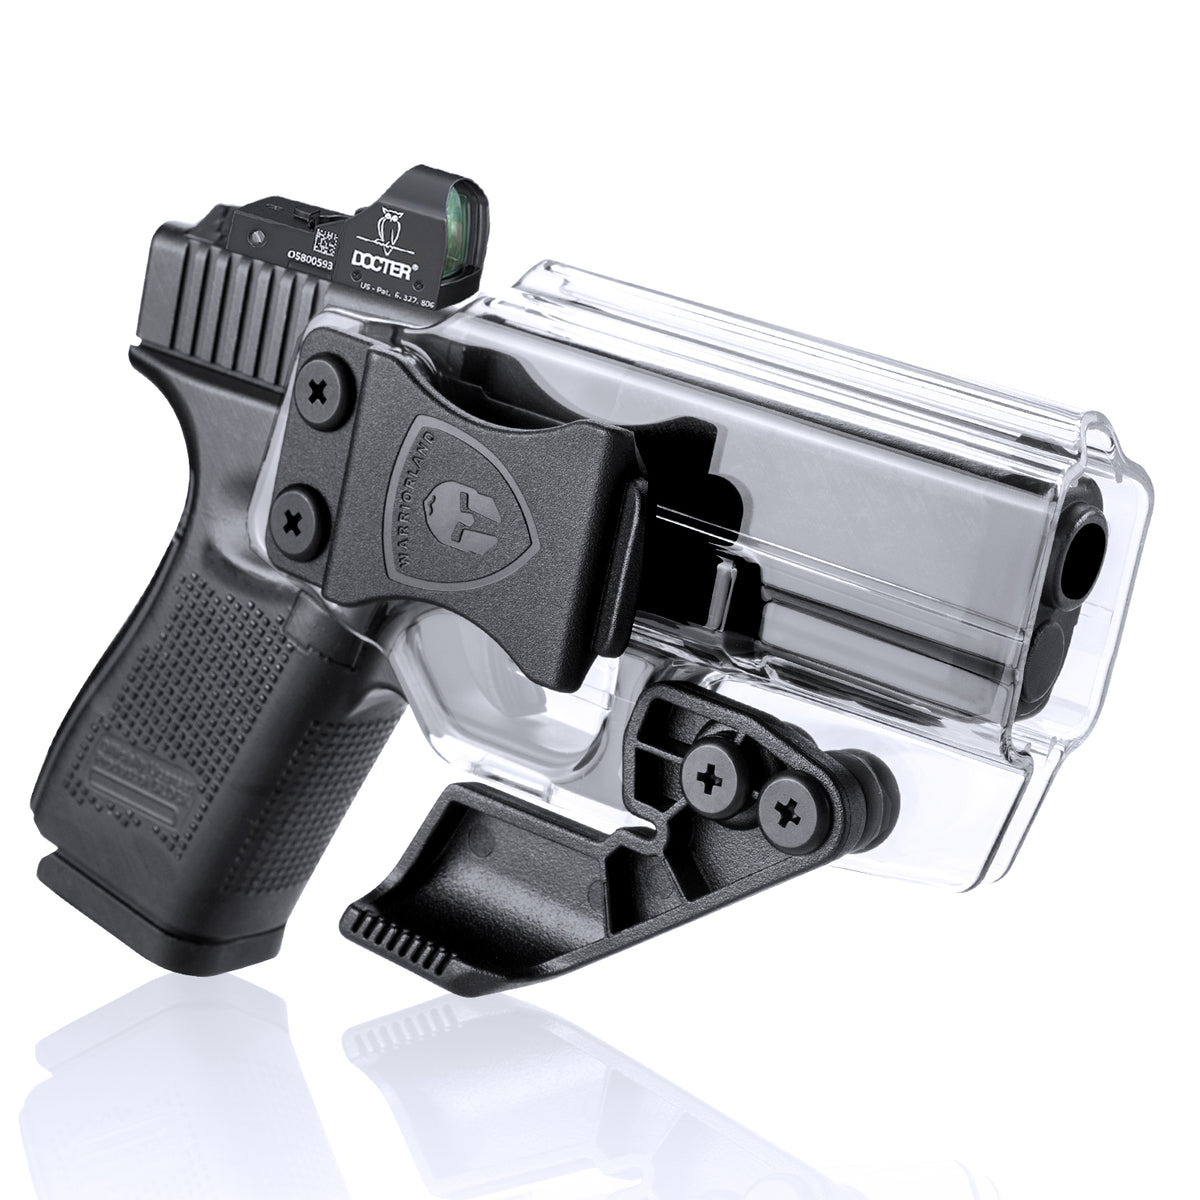 Clear Polymer IWB Holsters with Claw Glock 17 19  23 32 Gen 4 5 19X 44 45 Red Dot Optics Cut Appendix Concealment Carry Trigger Guard | WARRIORLAND